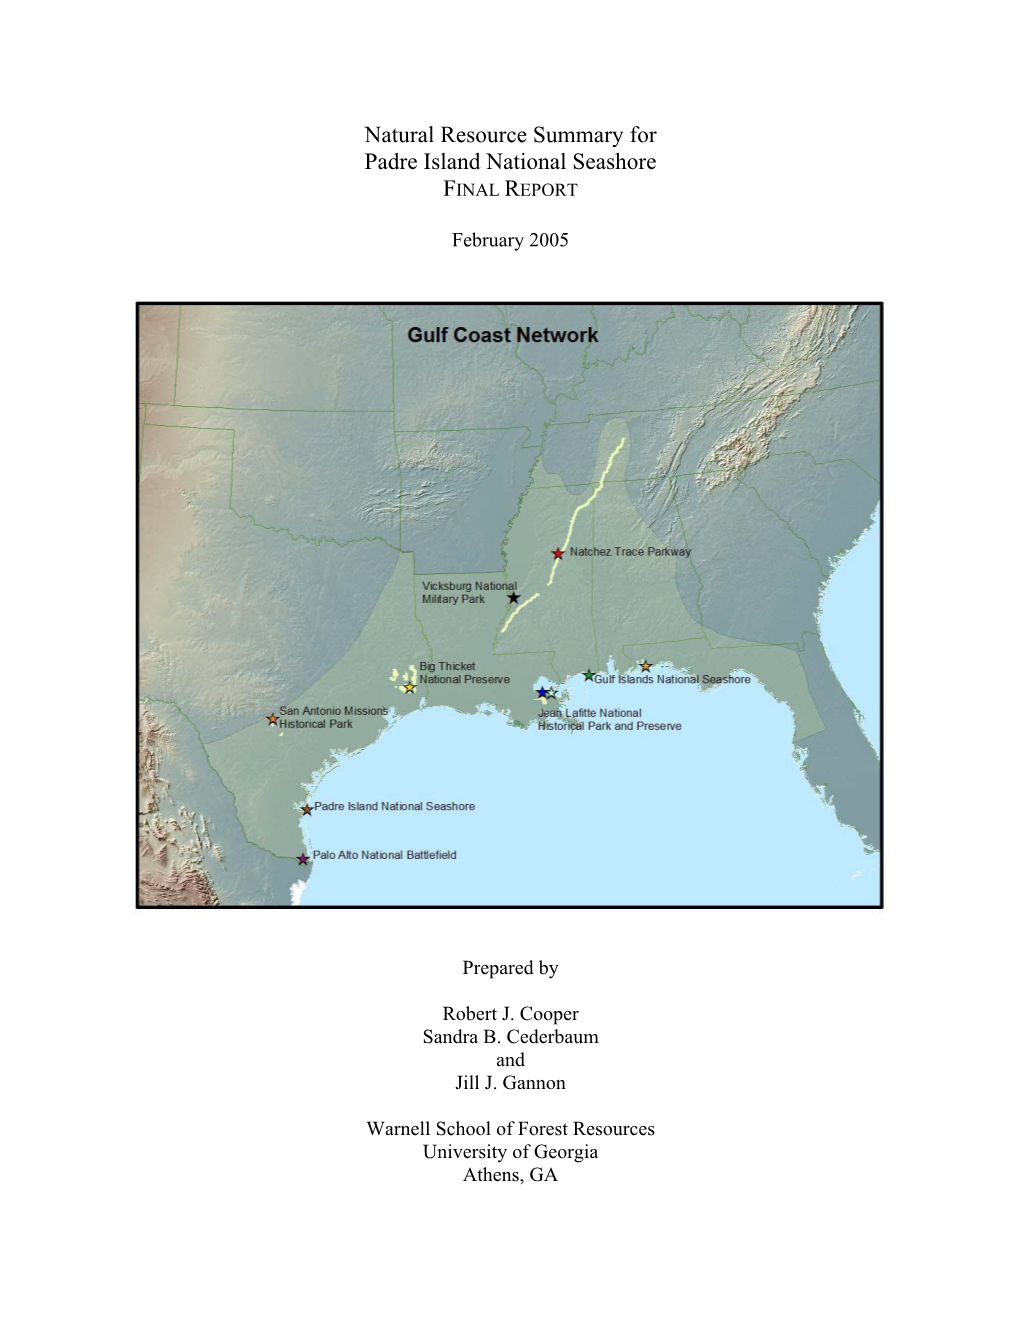 Natural Resource Summary for Padre Island National Seashore FINAL REPORT